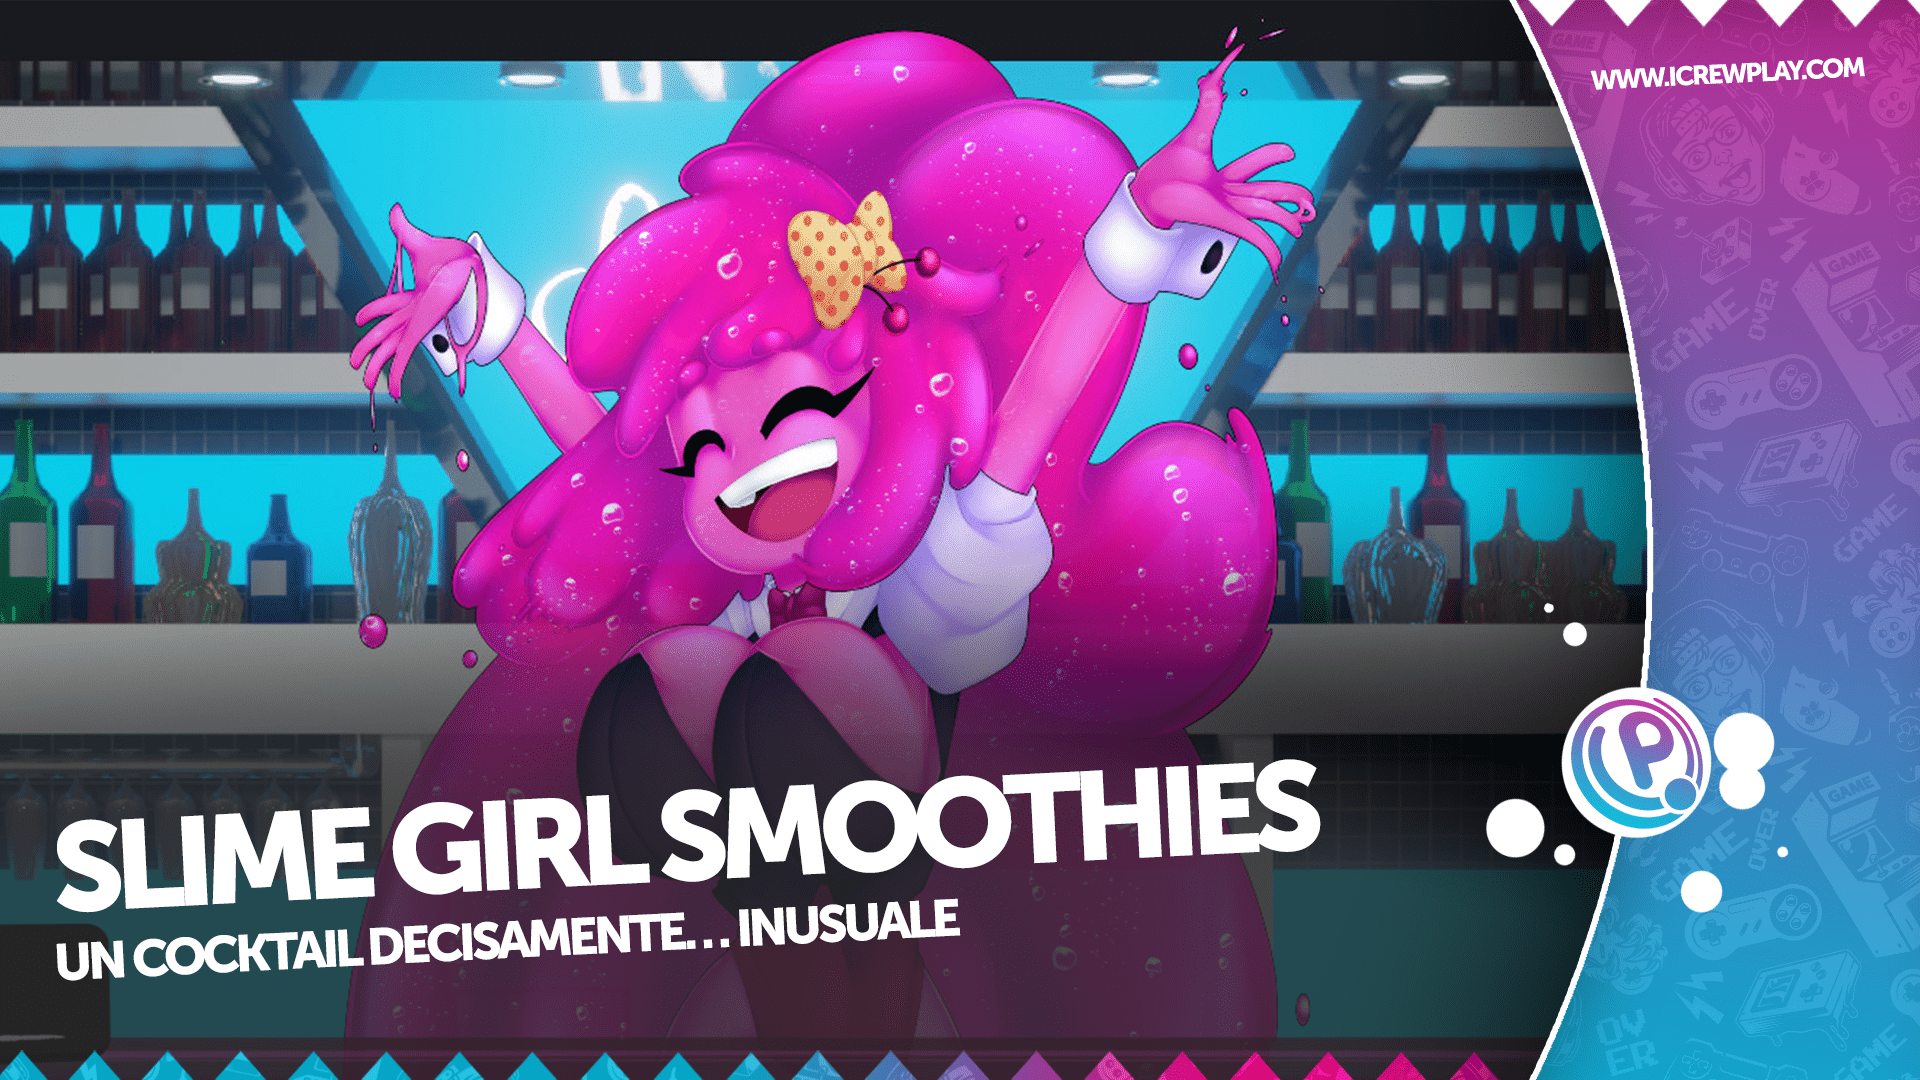 Slime Girl Smoothies recensione